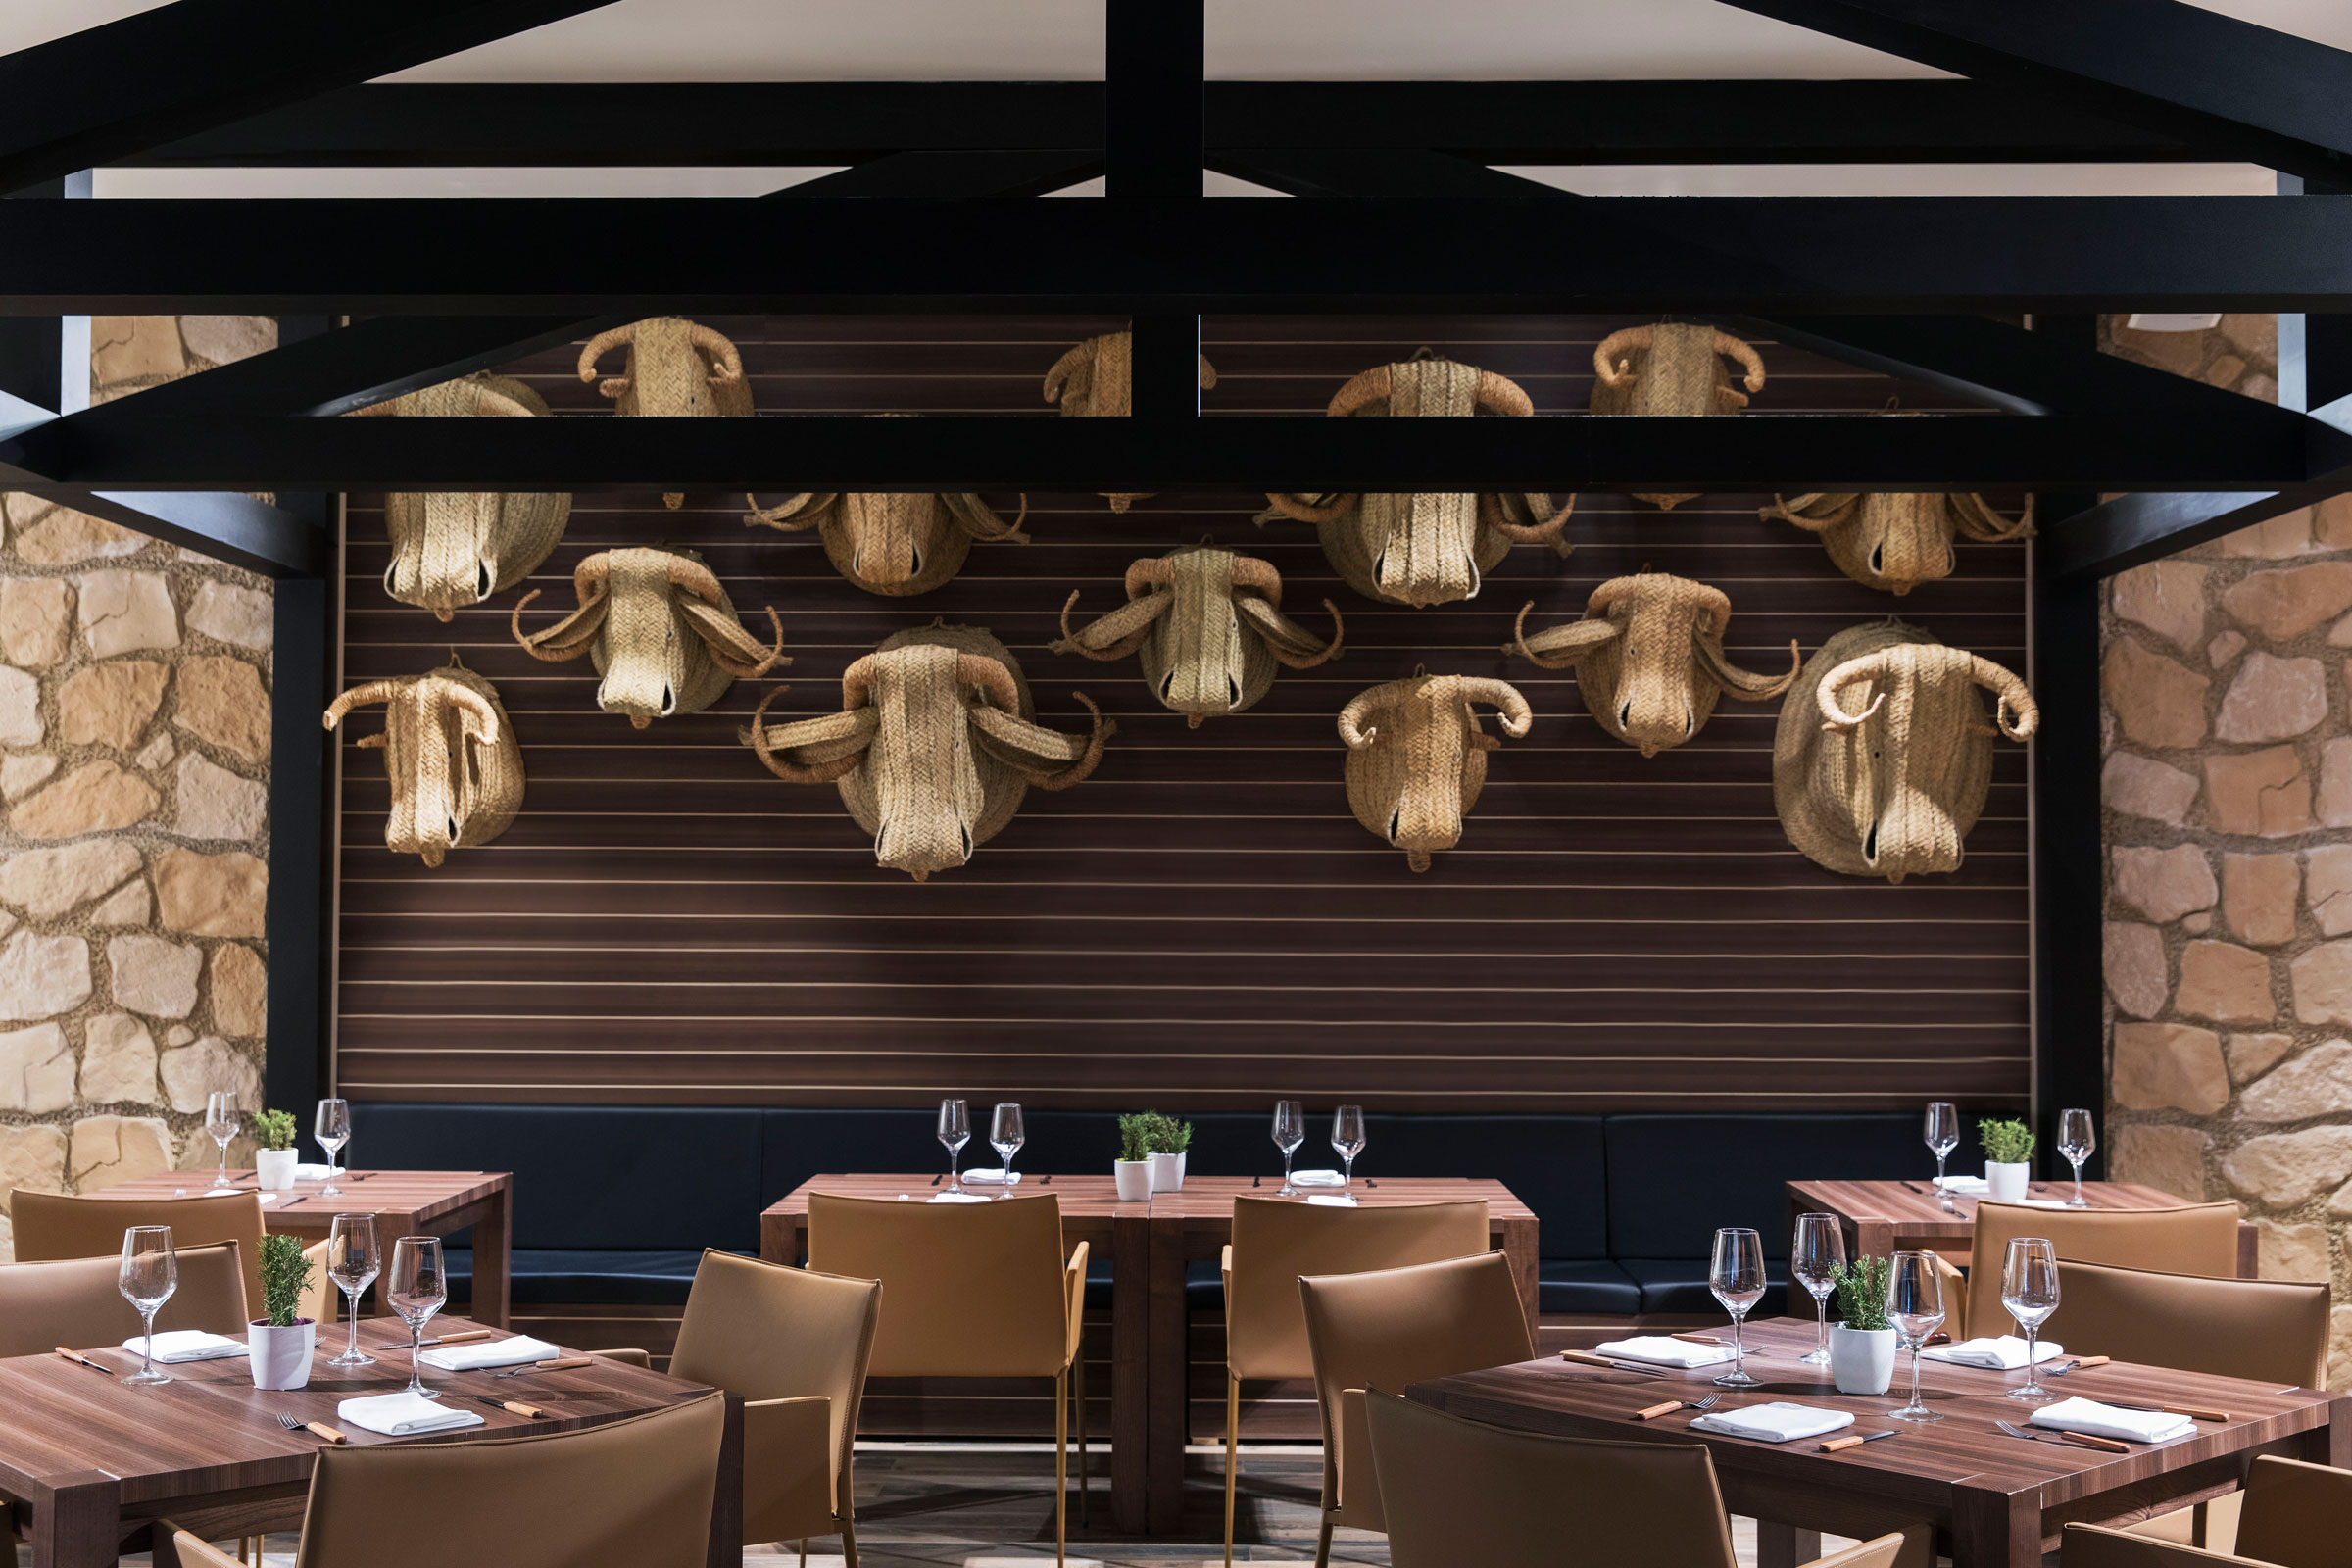 The Grill Restaurant at Excellence Oyster Bay awaits you with premium cuts of meat